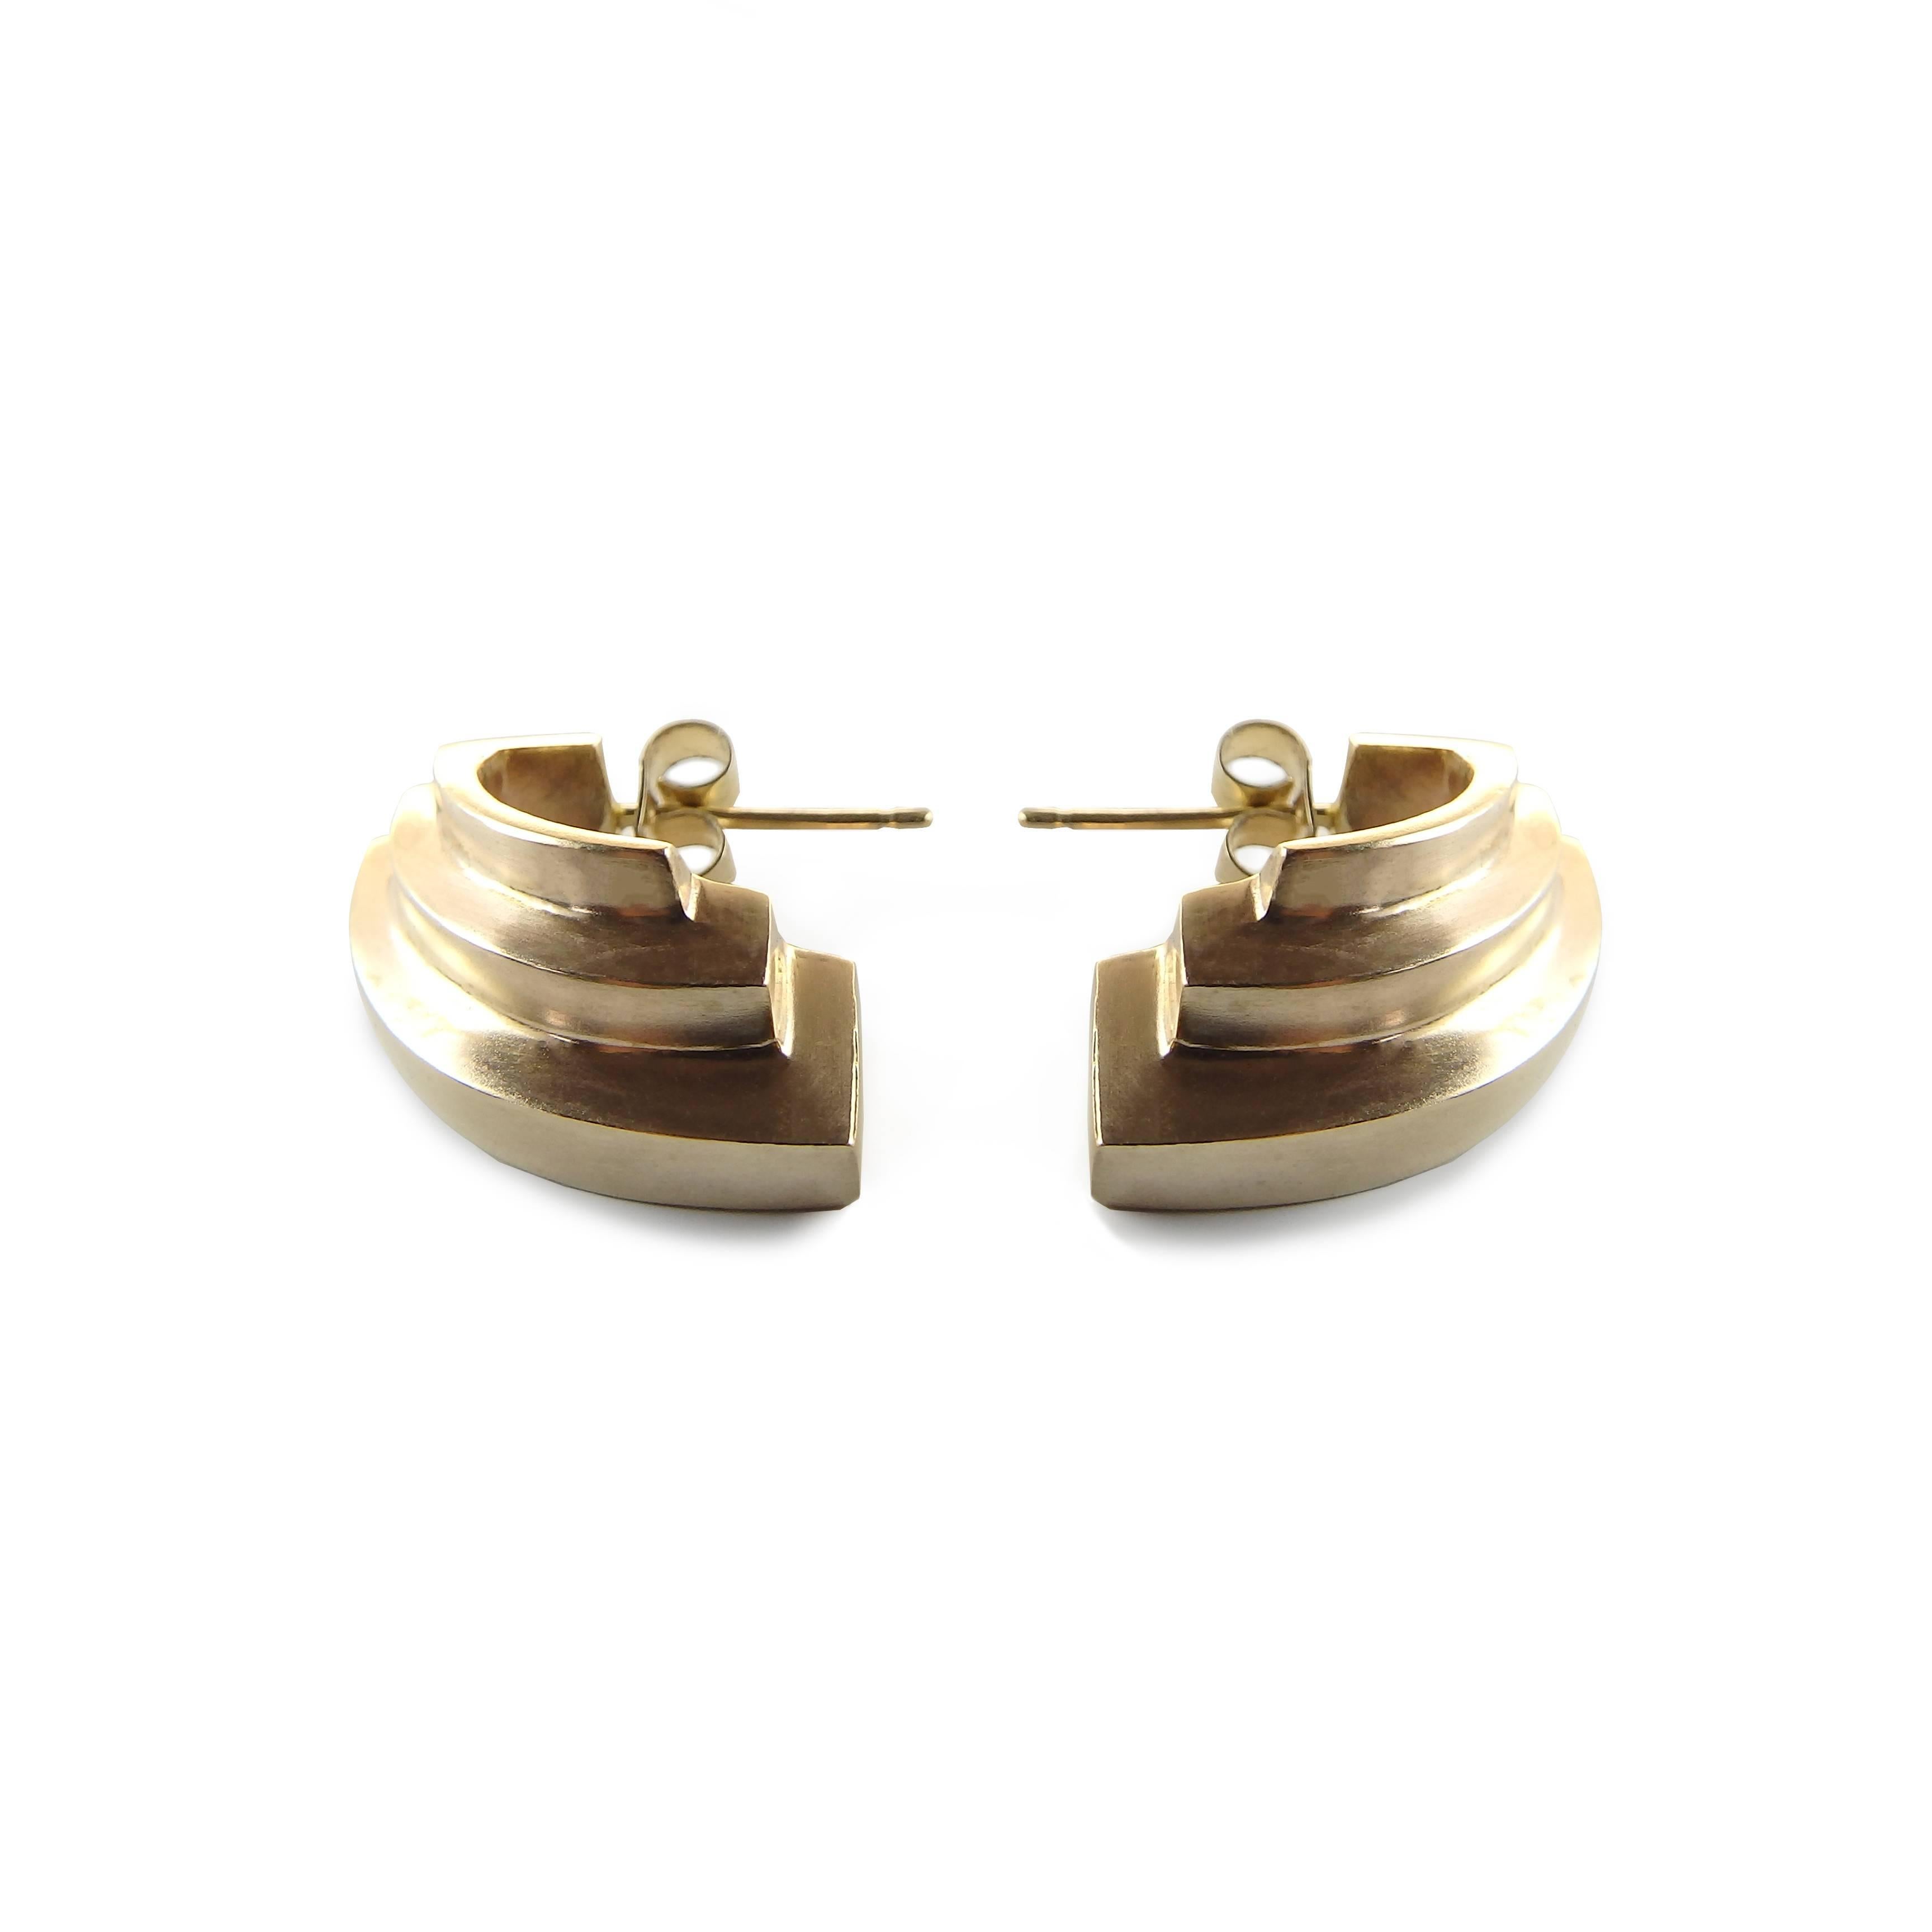 A uniquely sculptural brand, Emer Roberts Design 18 carat gold earrings reflect a streamlined and classic style. Bold, edgy and elegant, the architectural and art deco inspired earrings are contemporary and distinctly angular.

Designed and created